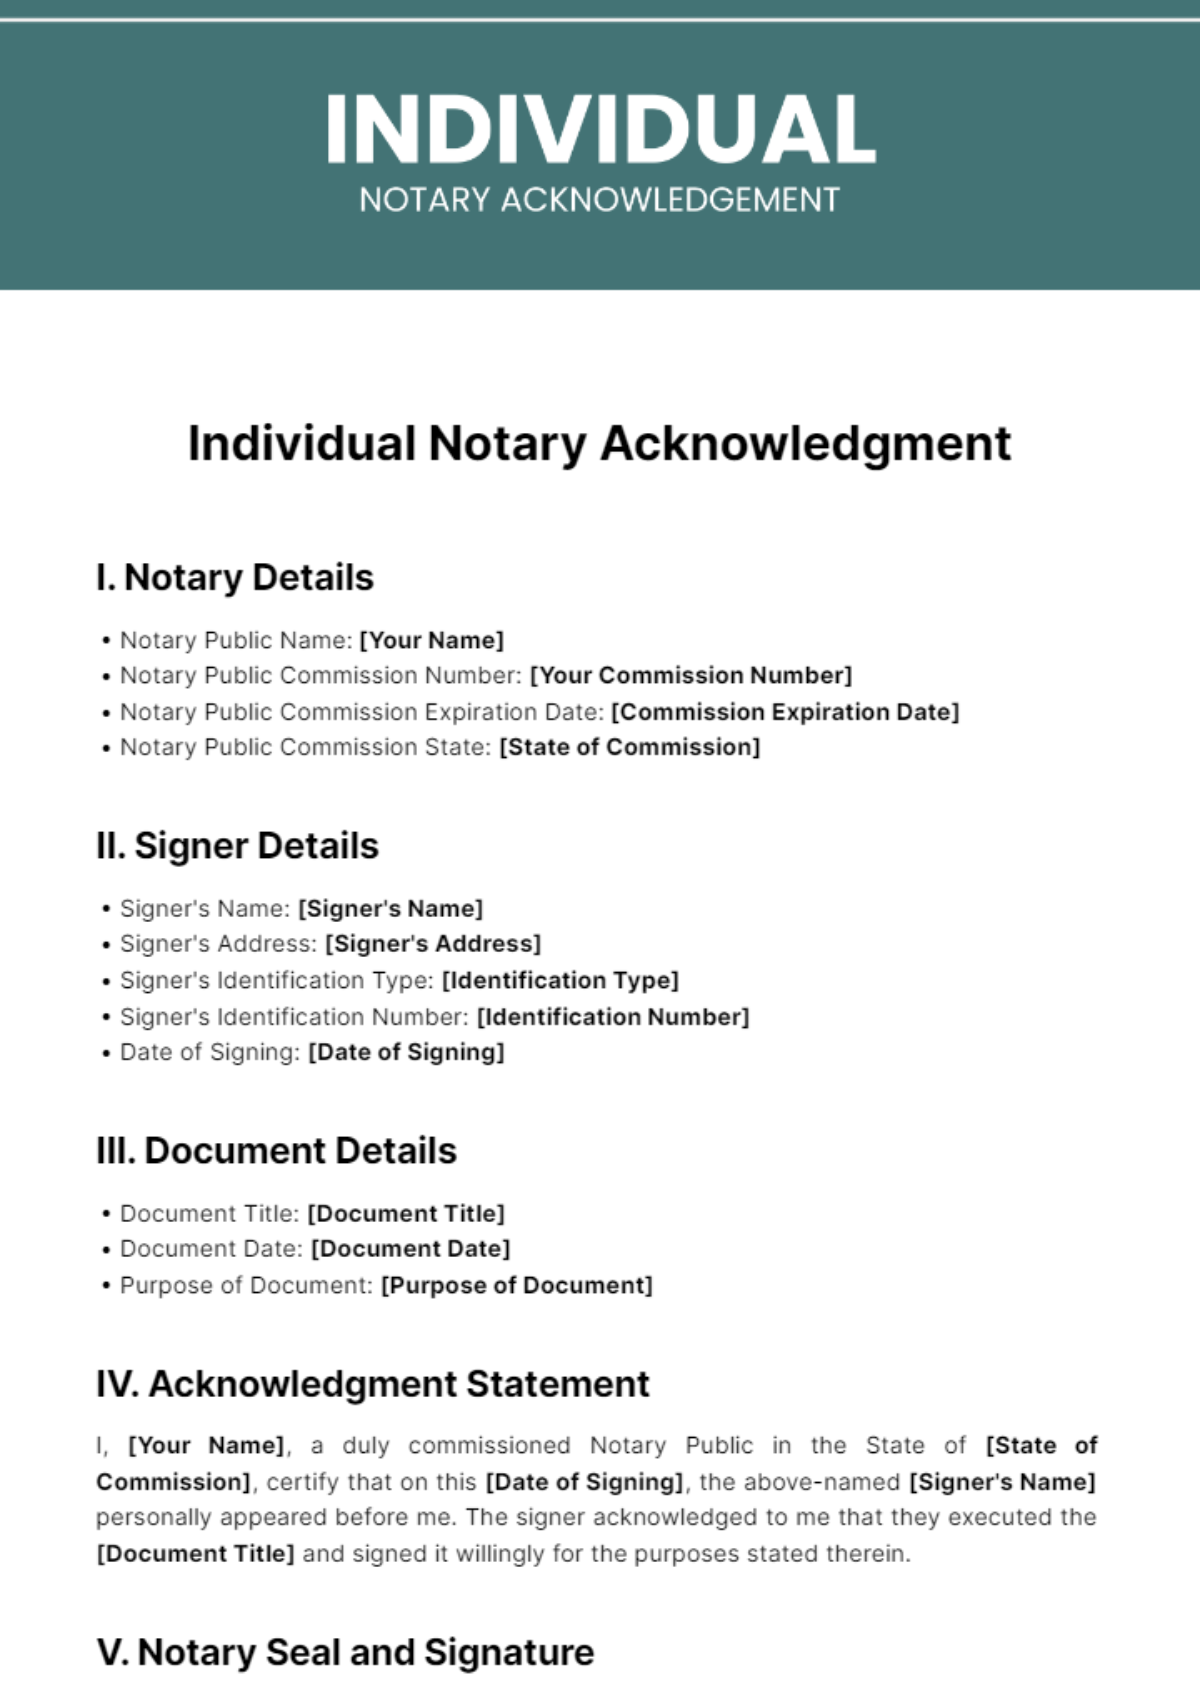 Individual Notary Acknowledgement Template